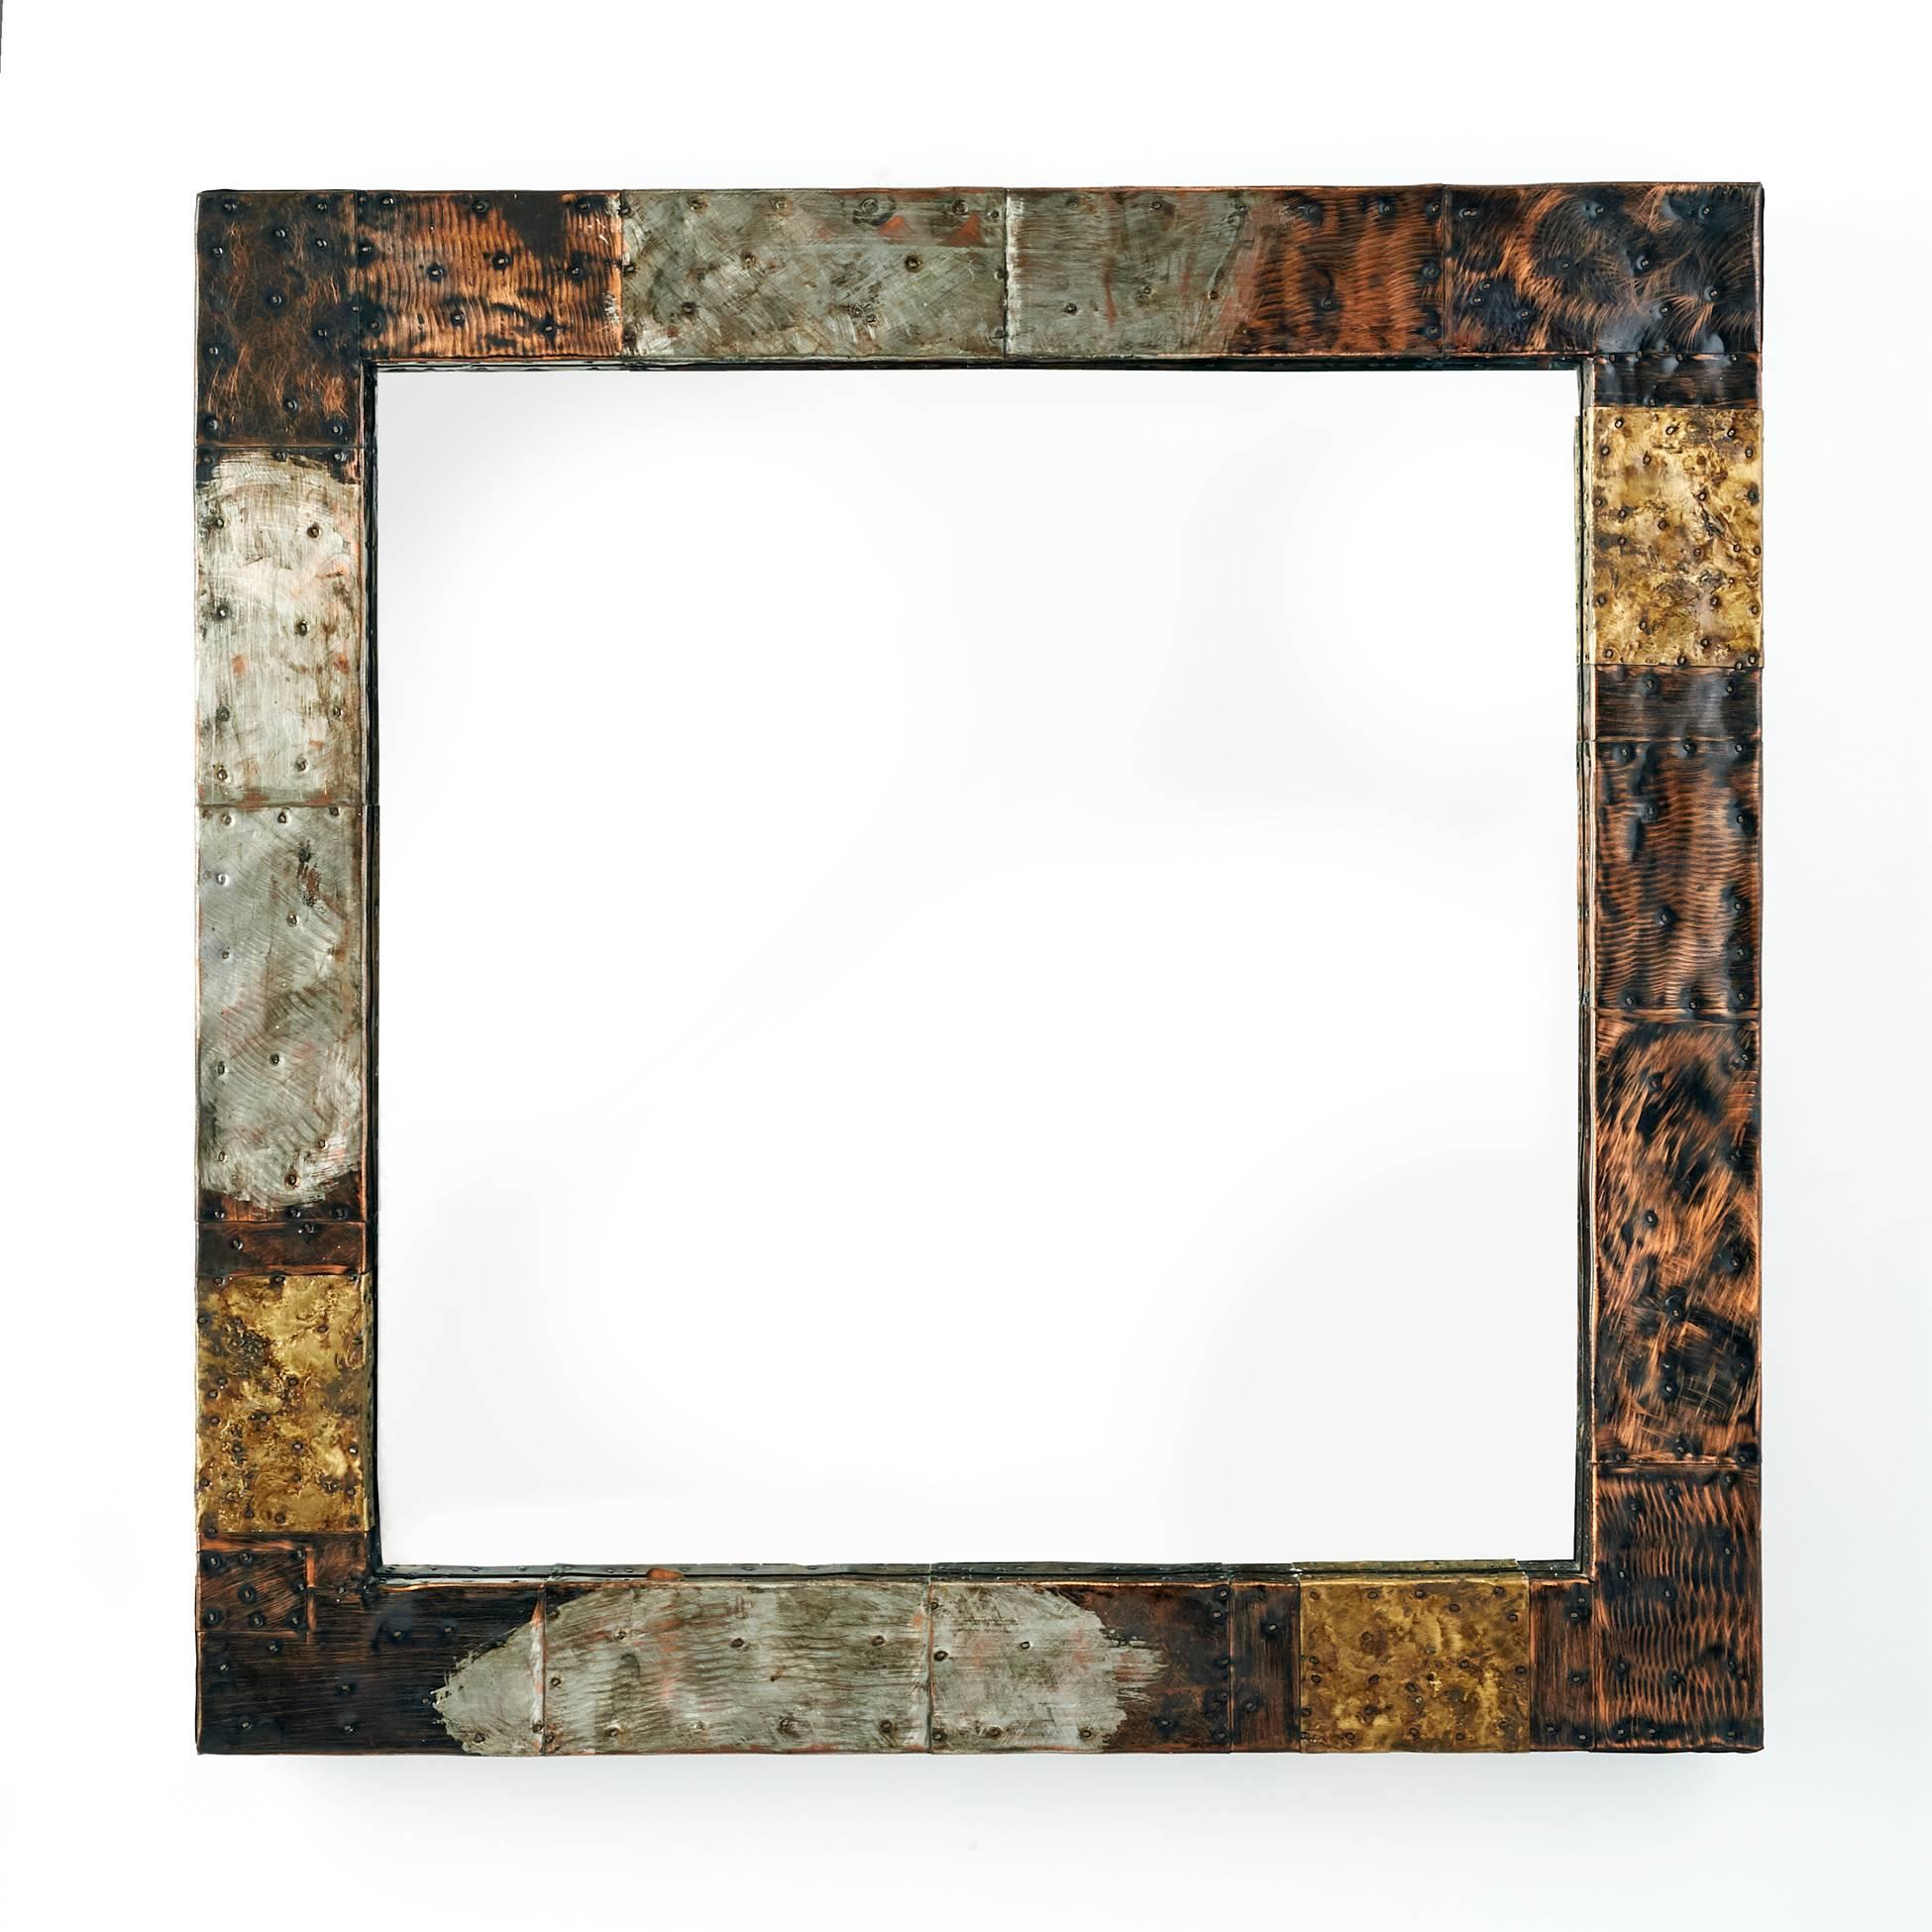 Paul Evans (1931–1987).

A beautifully crafted patchwork mirror in patinated and welded copper, brass, and steel by American Craft movement master Paul Evans. Poised between handicraft and industrial design, this iconic piece is an excellent